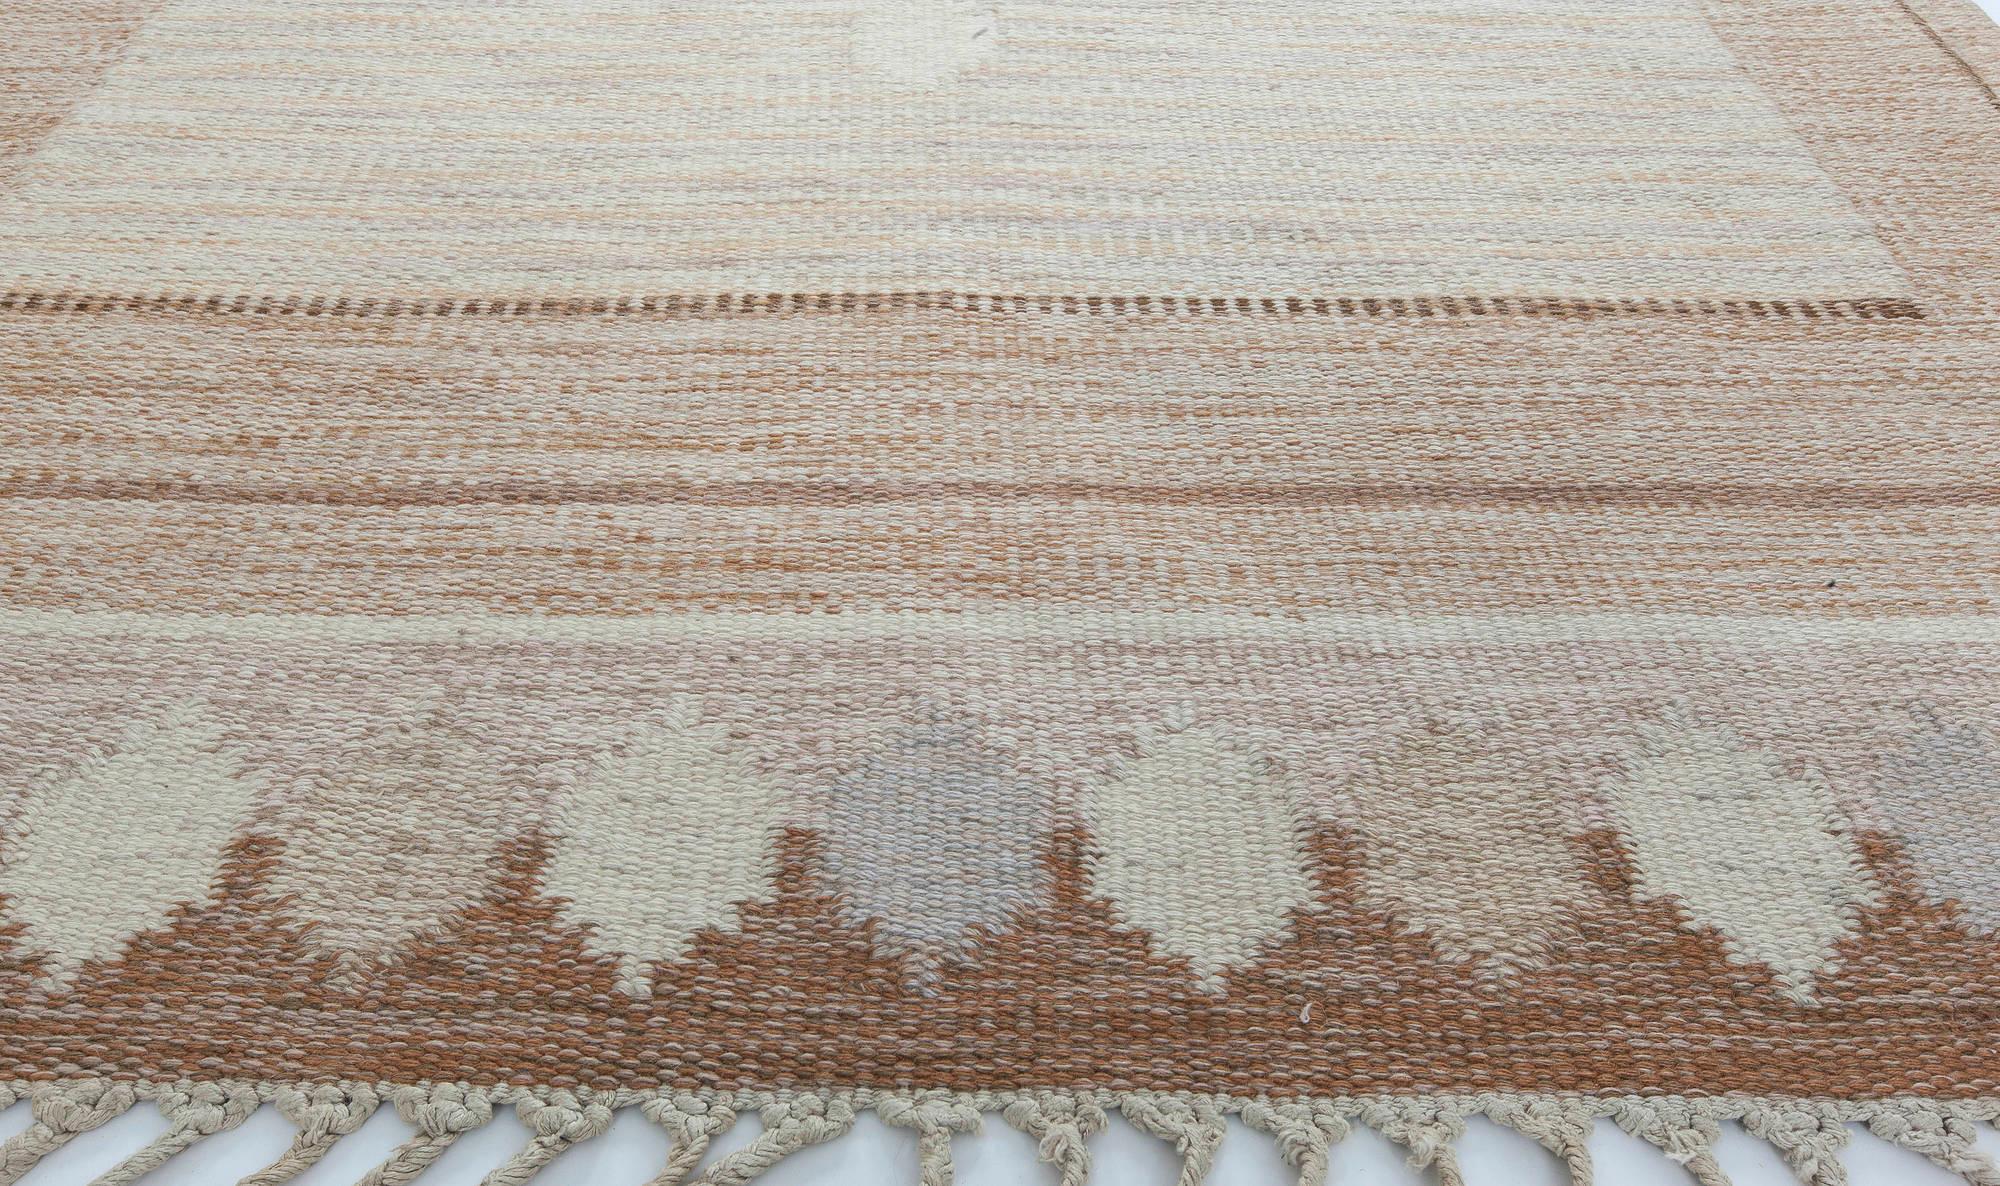 Vintage Swedish caramel rug by Ingegerd Silow. Woven signature to edge 'IS'
Size: 4'4